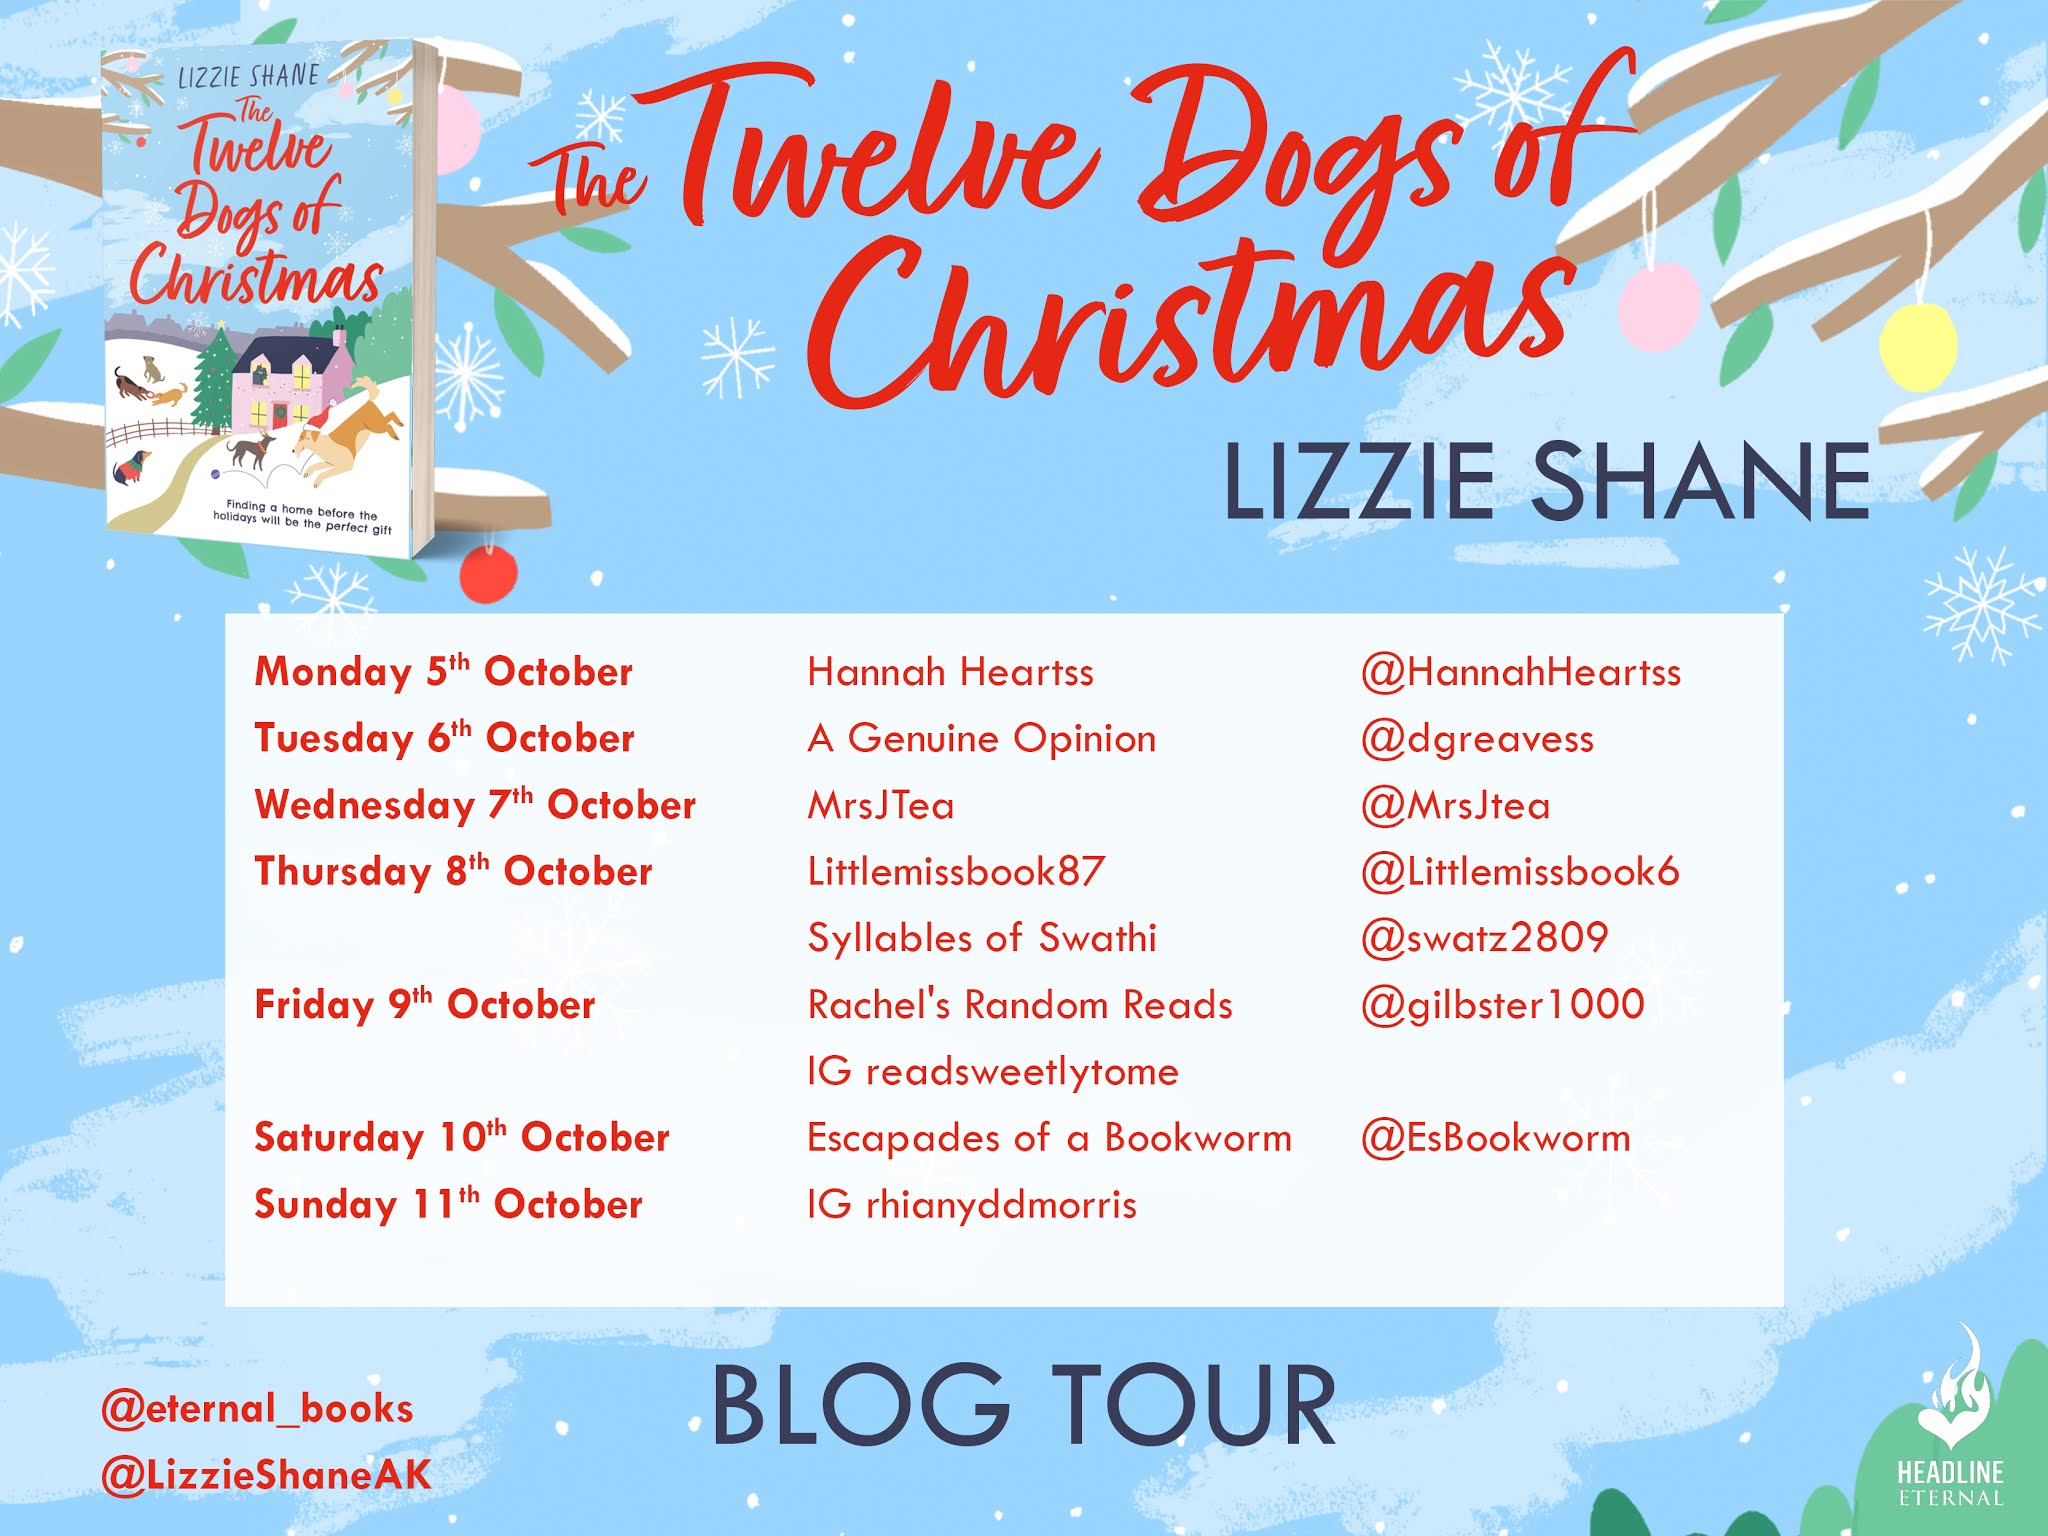 The Twelve Dogs of Christmas - Lizzie Shane | Spoiler Free Book Review